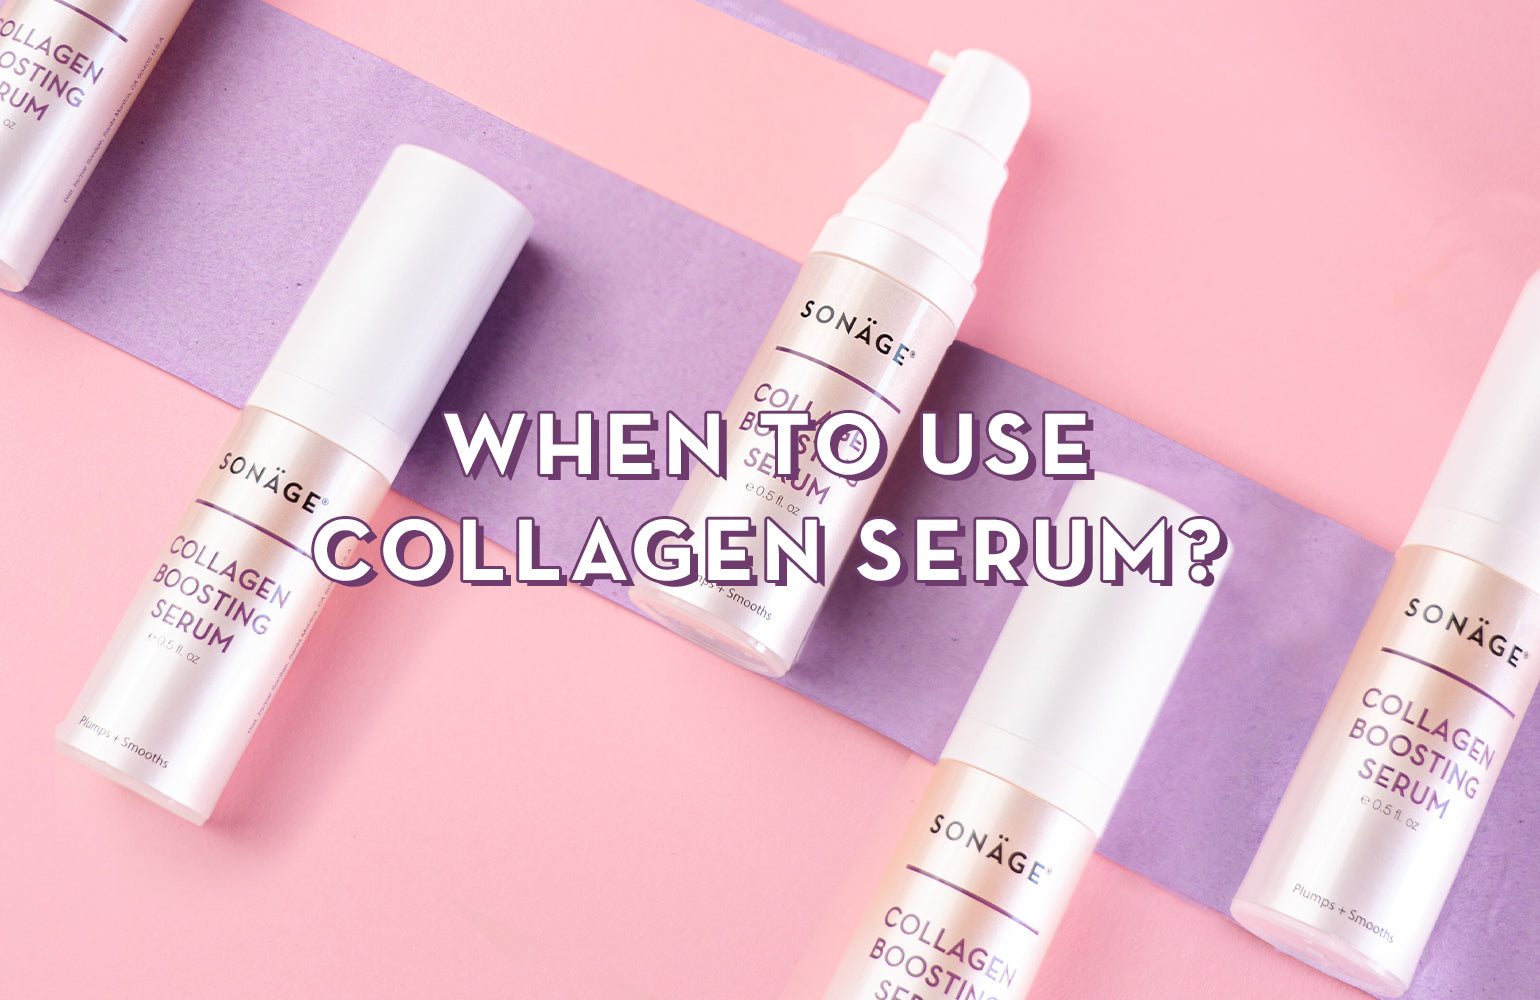 What Is Serum and What Does Serum Do, Exactly?